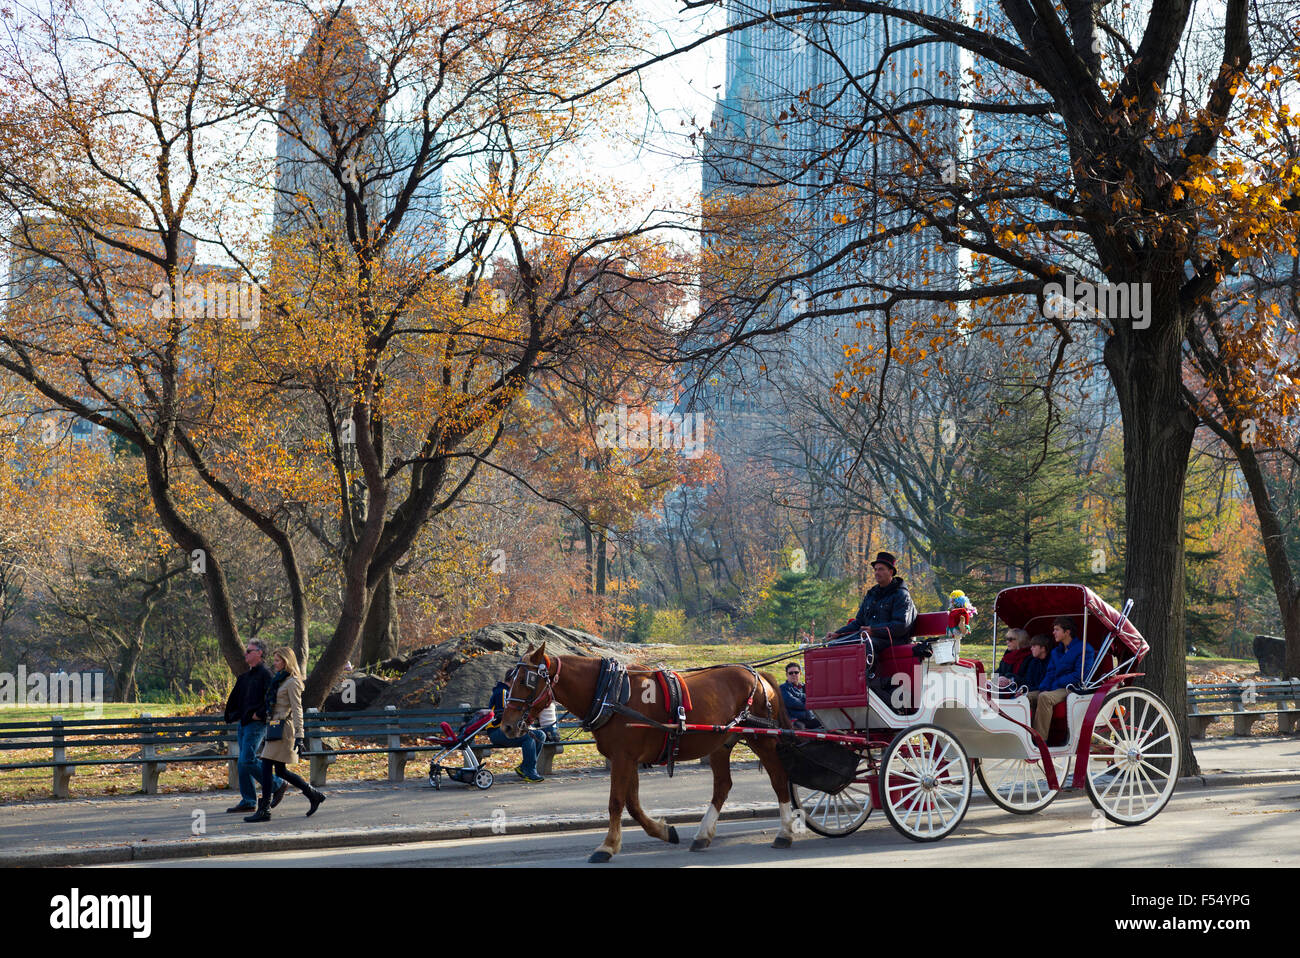 Tourists taking traditional horse and carriage ride in winter time in Central Park, New York, USA Stock Photo